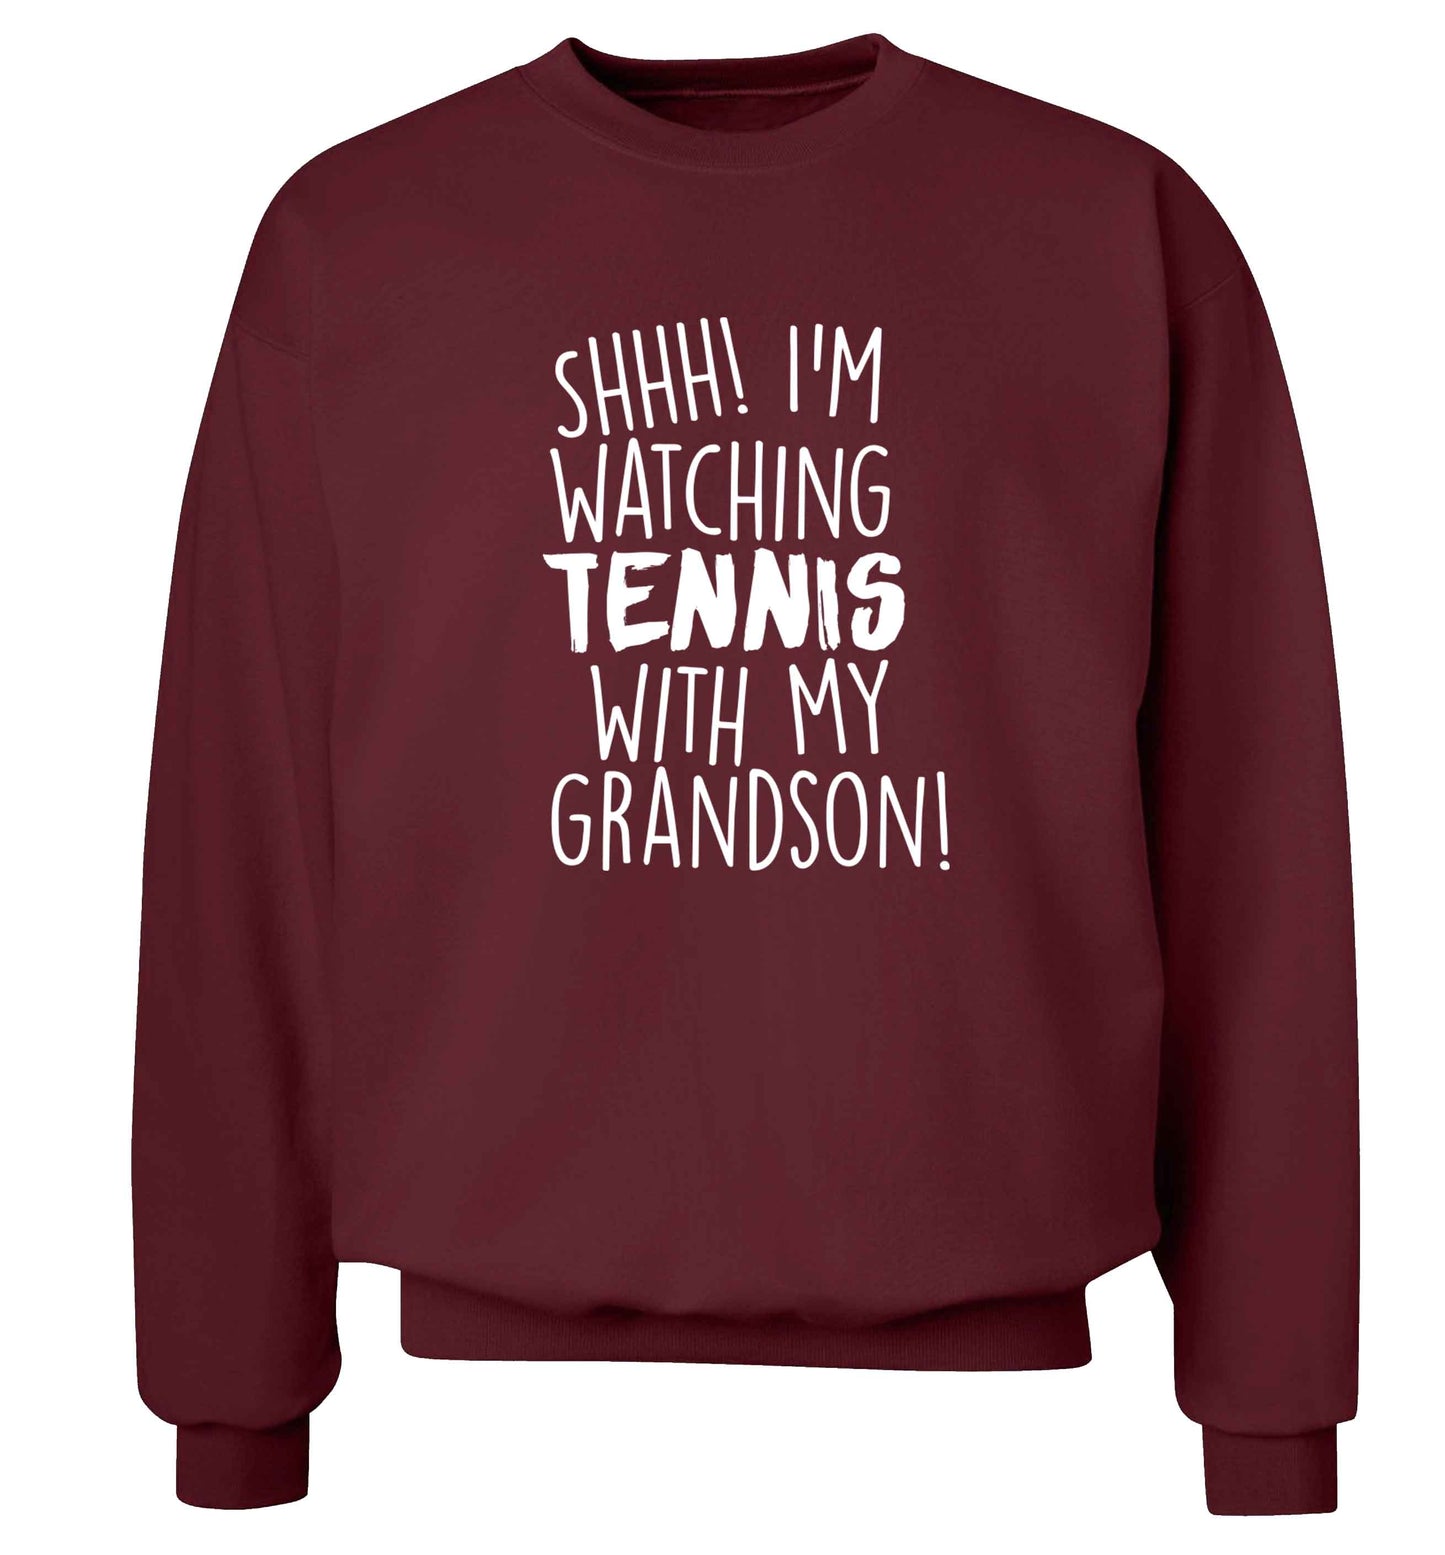 Shh! I'm watching tennis with my grandson! Adult's unisex maroon Sweater 2XL